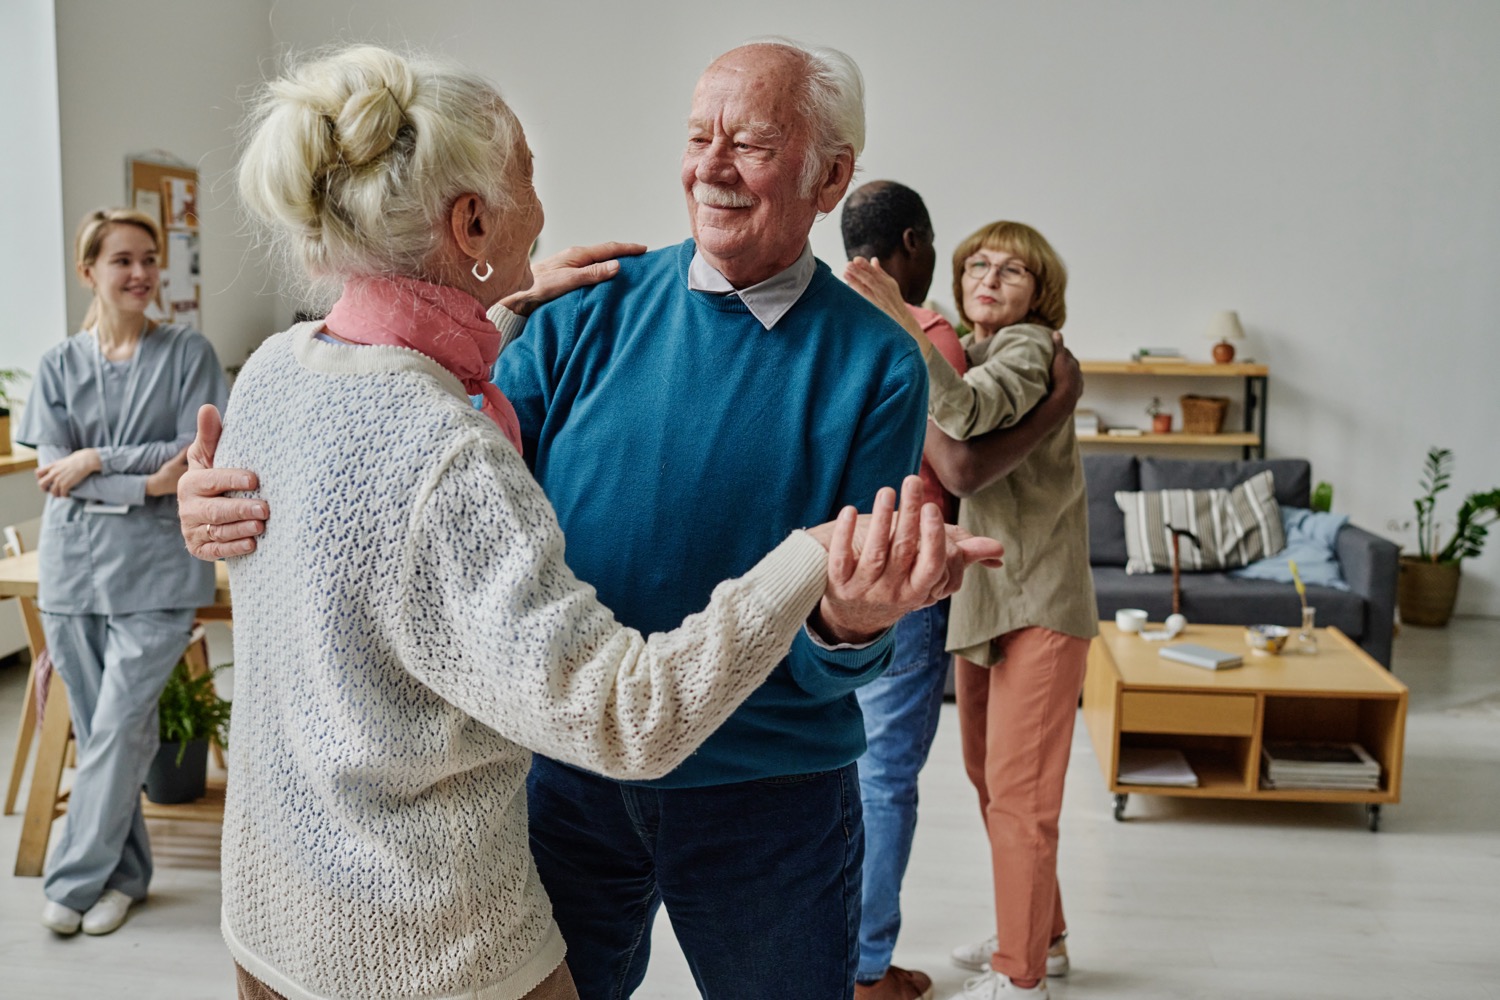 As a man with Alzheimer’s dances with his wife, the music brings back happy memories from their life together.